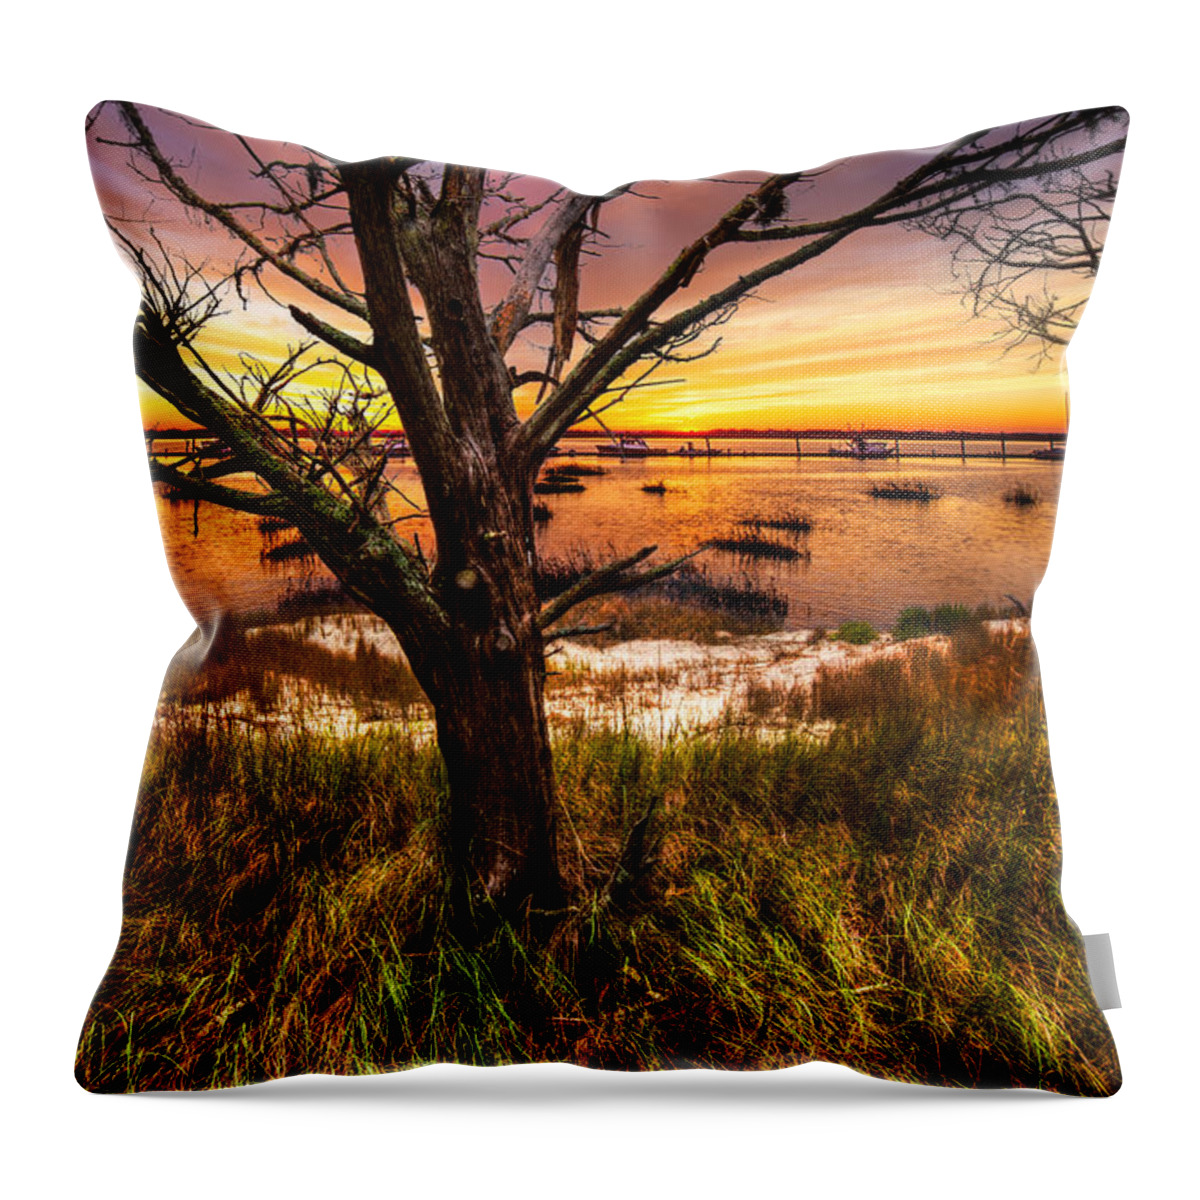 Clouds Throw Pillow featuring the photograph Coastal Harbor by Debra and Dave Vanderlaan